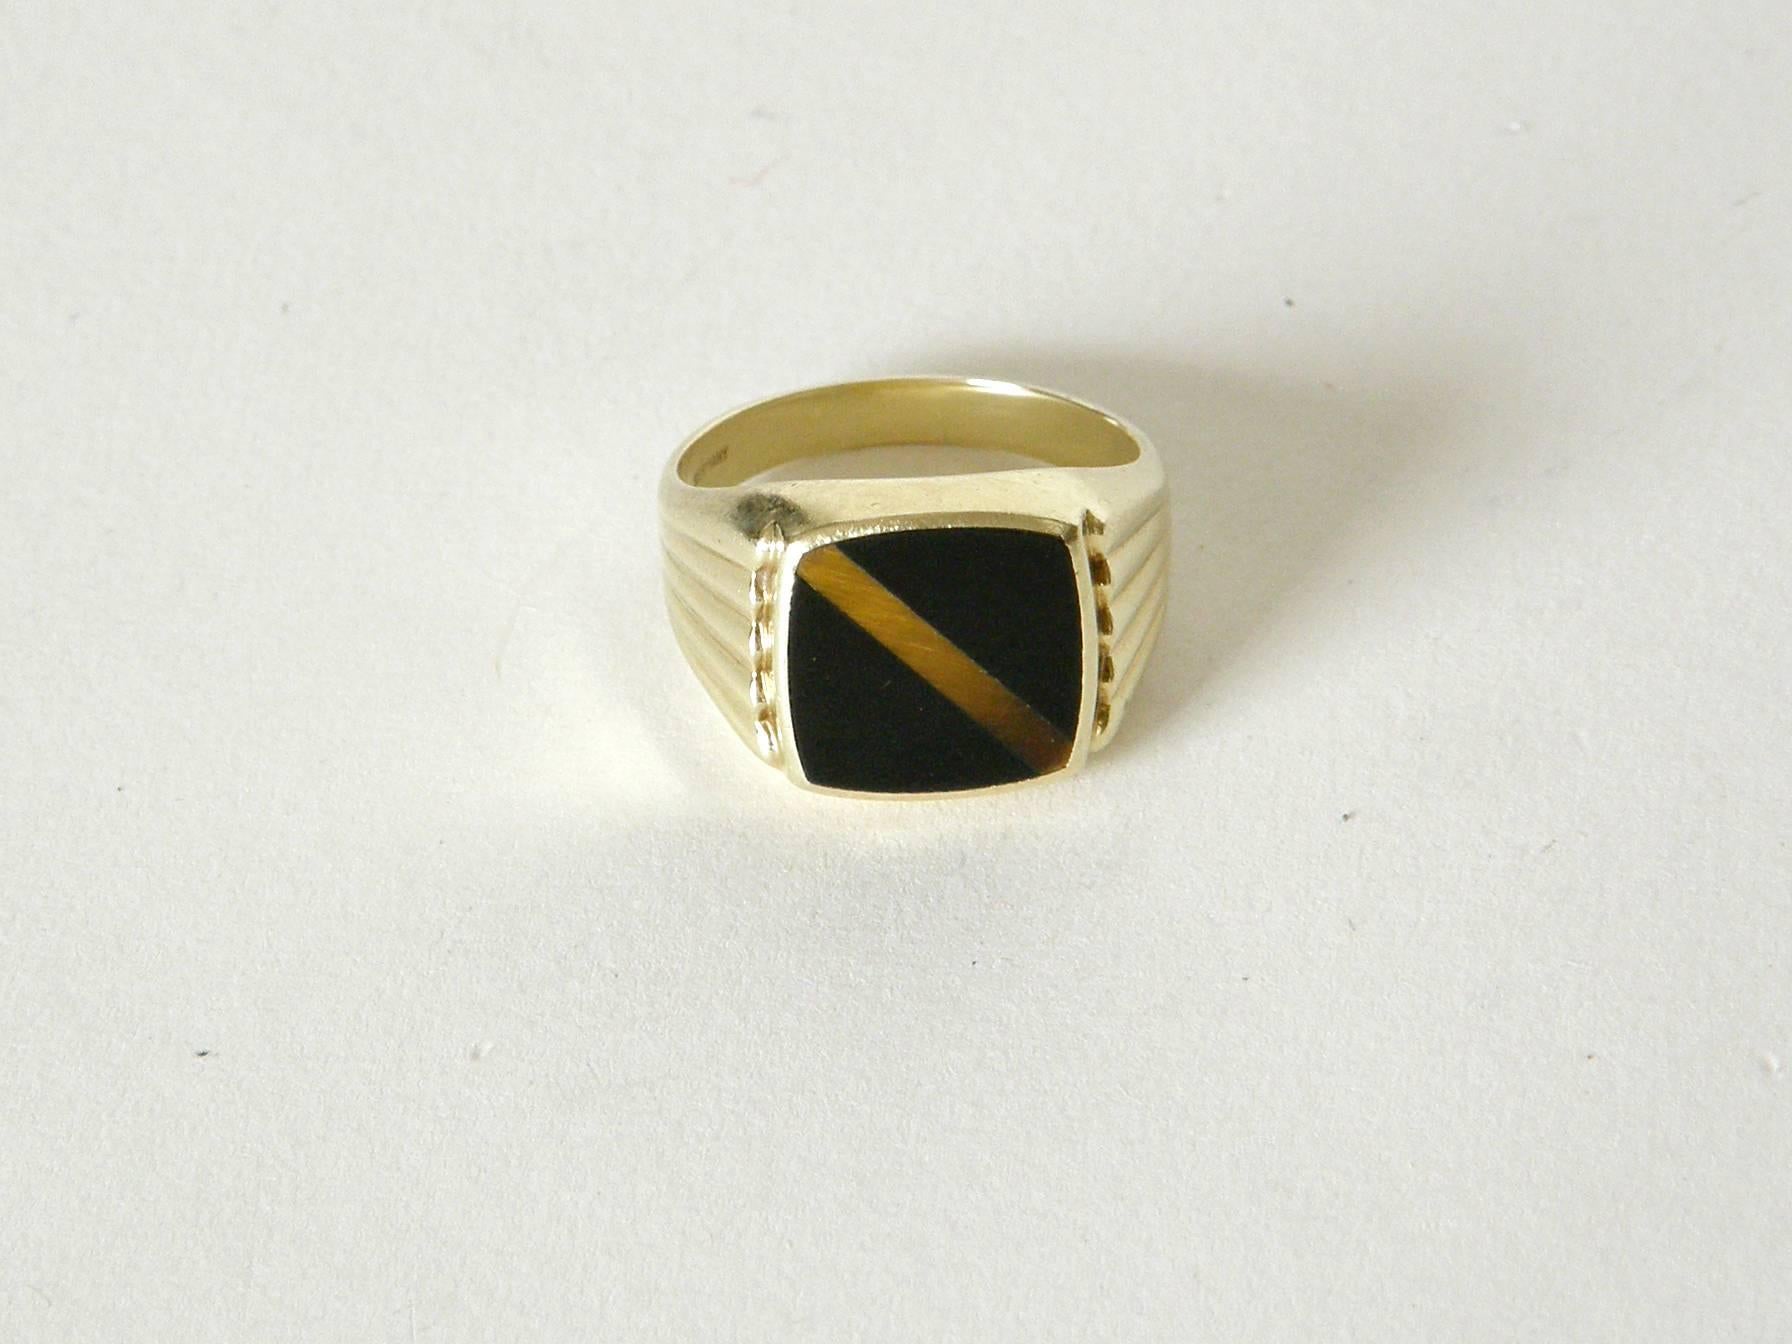 Handsome 14K yellow gold signet style ring. It has a flat bezel set with onyx and tigers eye and fan snapped designs on the sides. The technique of the stone setting is like a pieta dura with tight, flush edges between the onyx sides and the